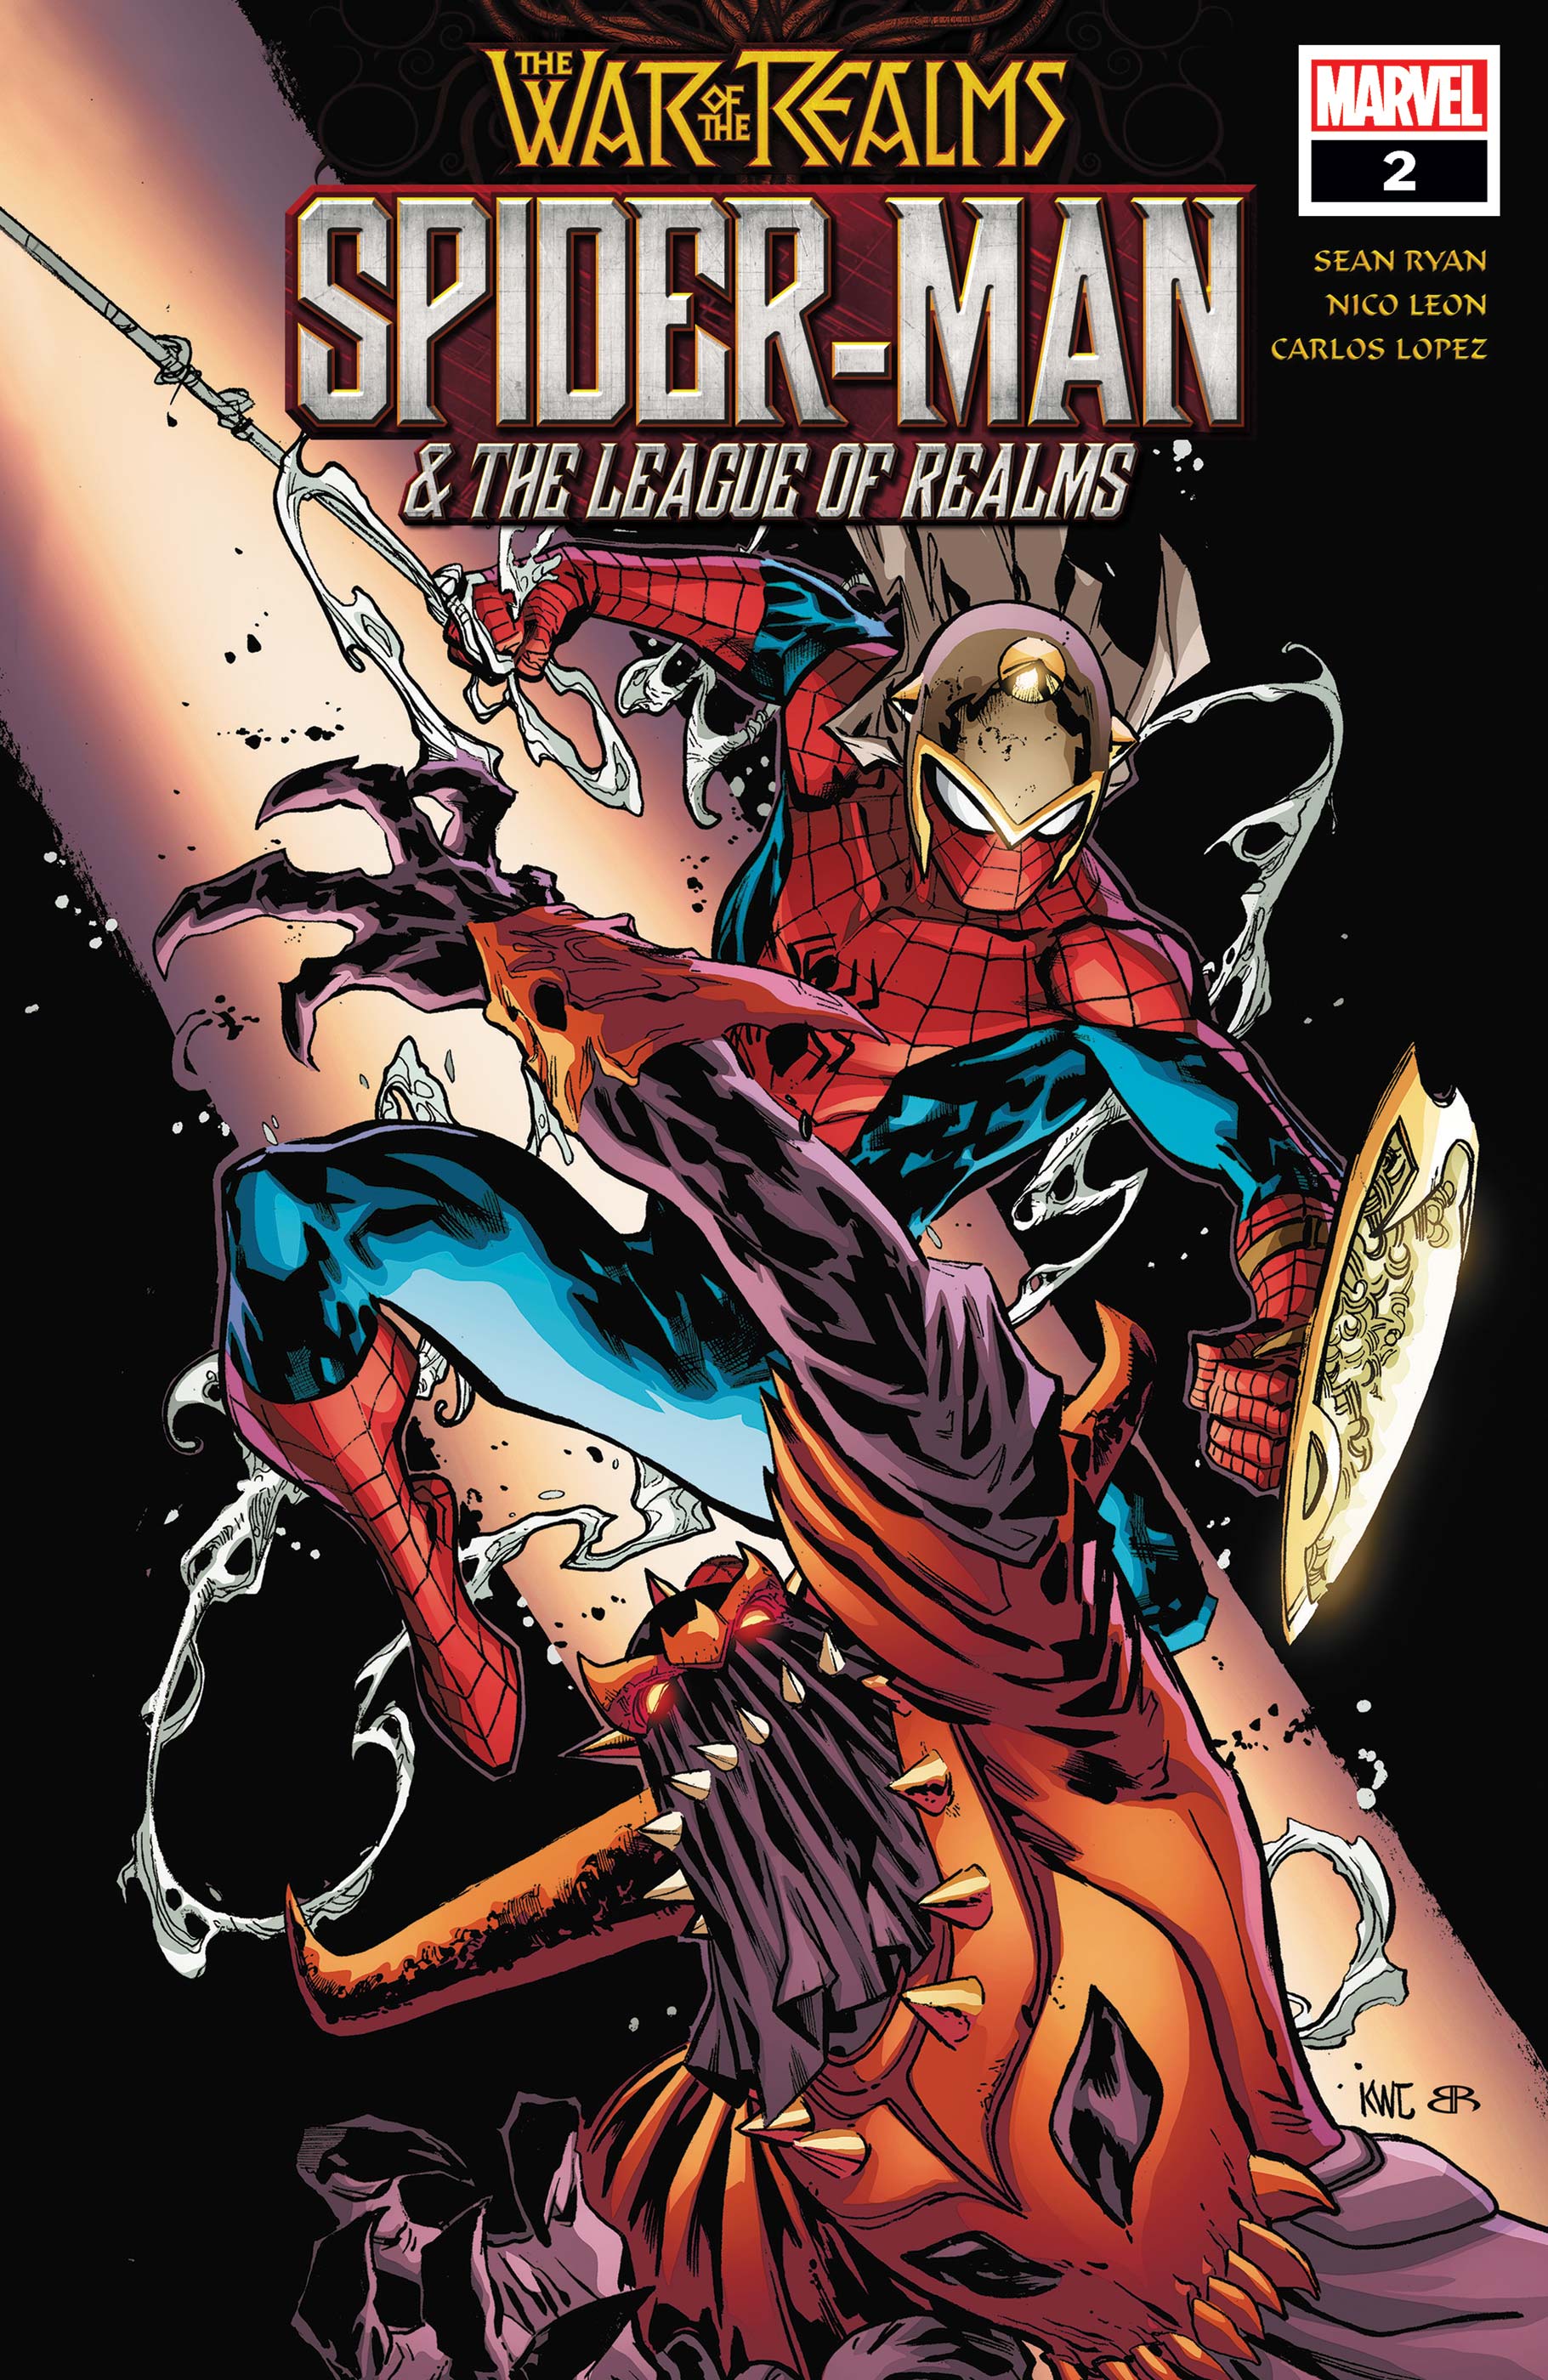 Spider-Man & the League of Realms (2019) #2